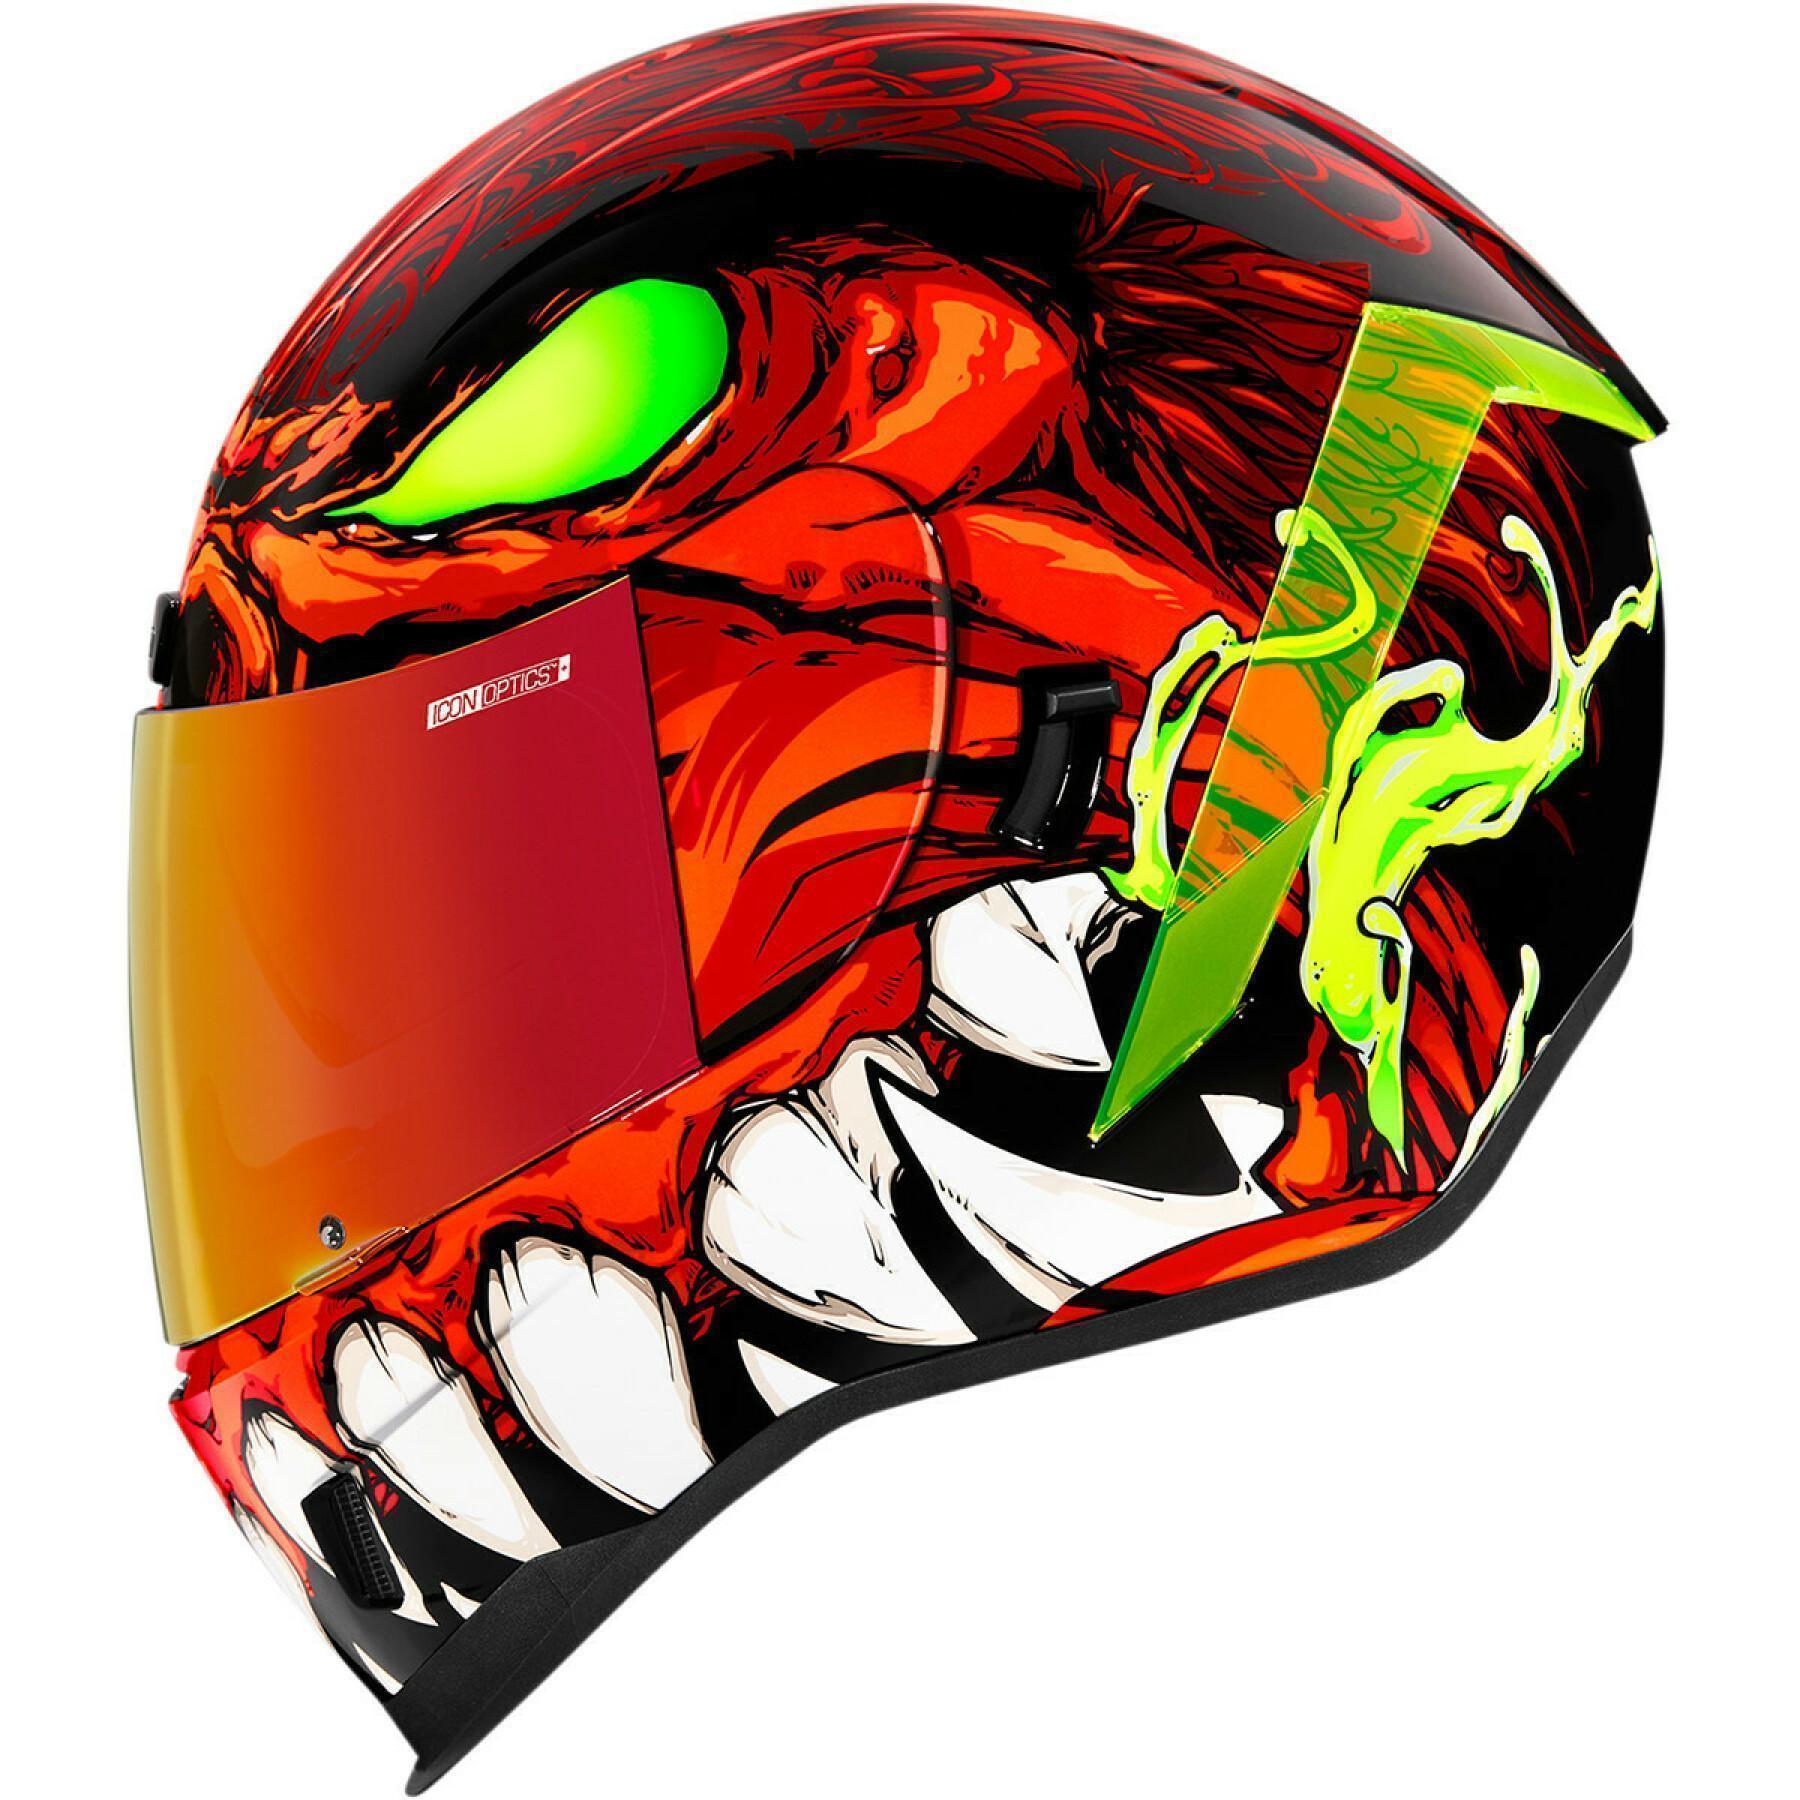 Full face motorcycle helmet Icon afrm manic'r